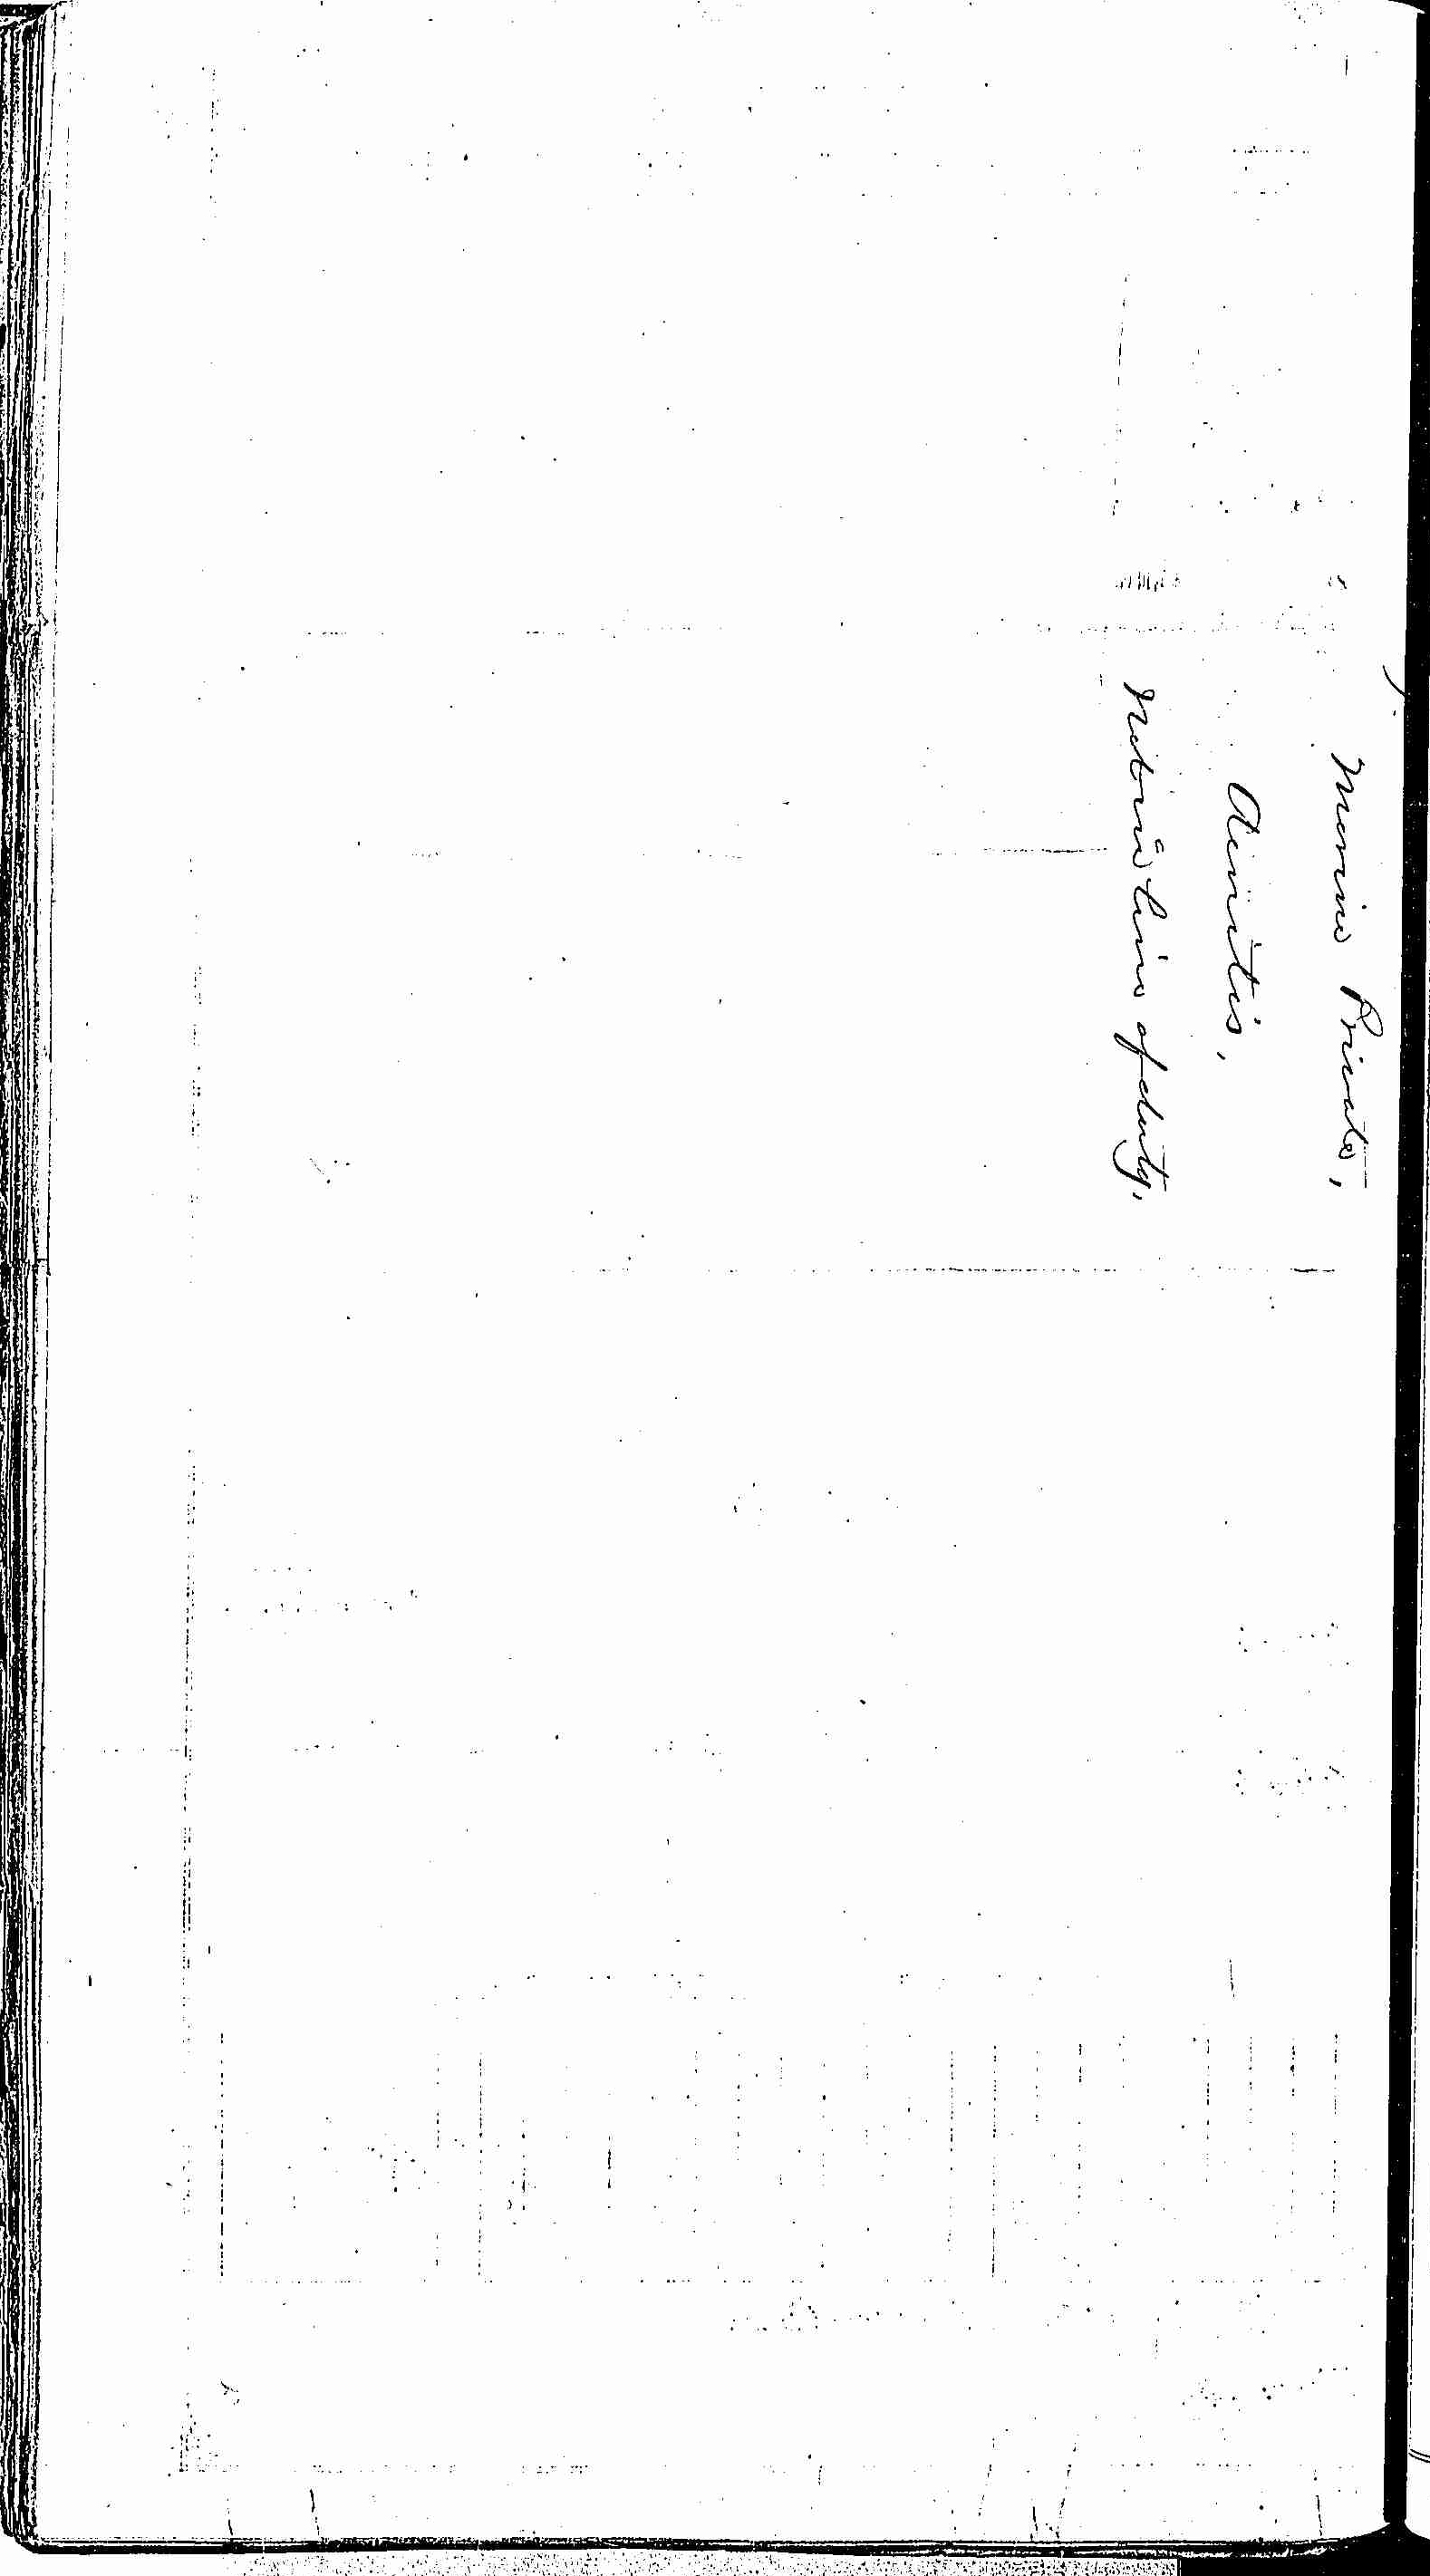 Entry for Zachariah McFarland (page 2 of 2) in the log Hospital Tickets and Case Papers - Naval Hospital - Washington, D.C. - 1866-68